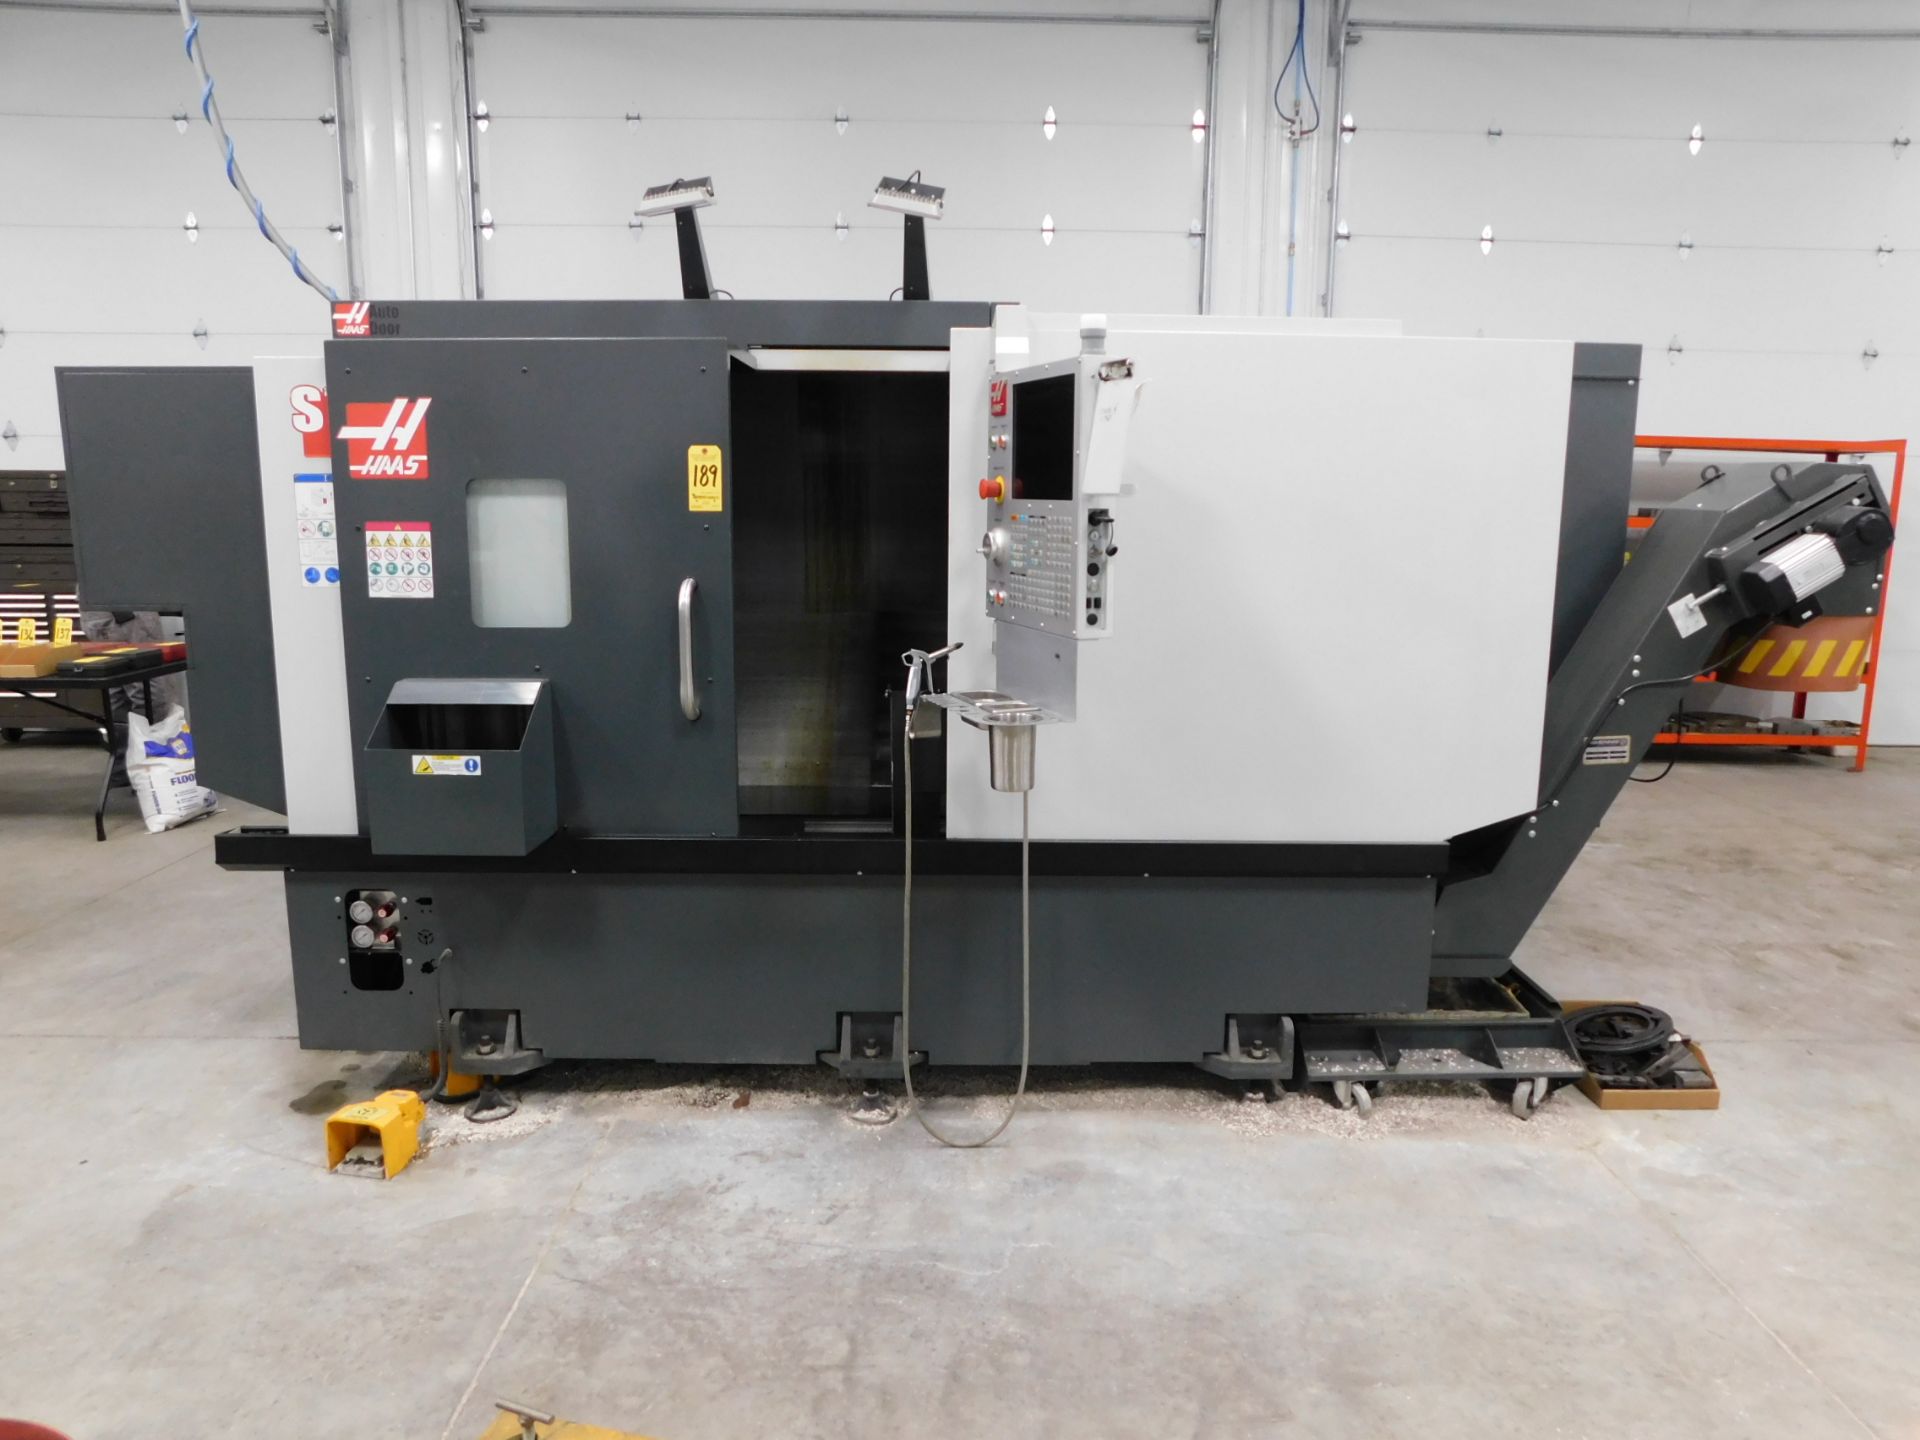 Haas ST30 CNC Turning Center sn 3119670, New in 2020, 12"3-Jaw Chuck, 12-Station Turret,